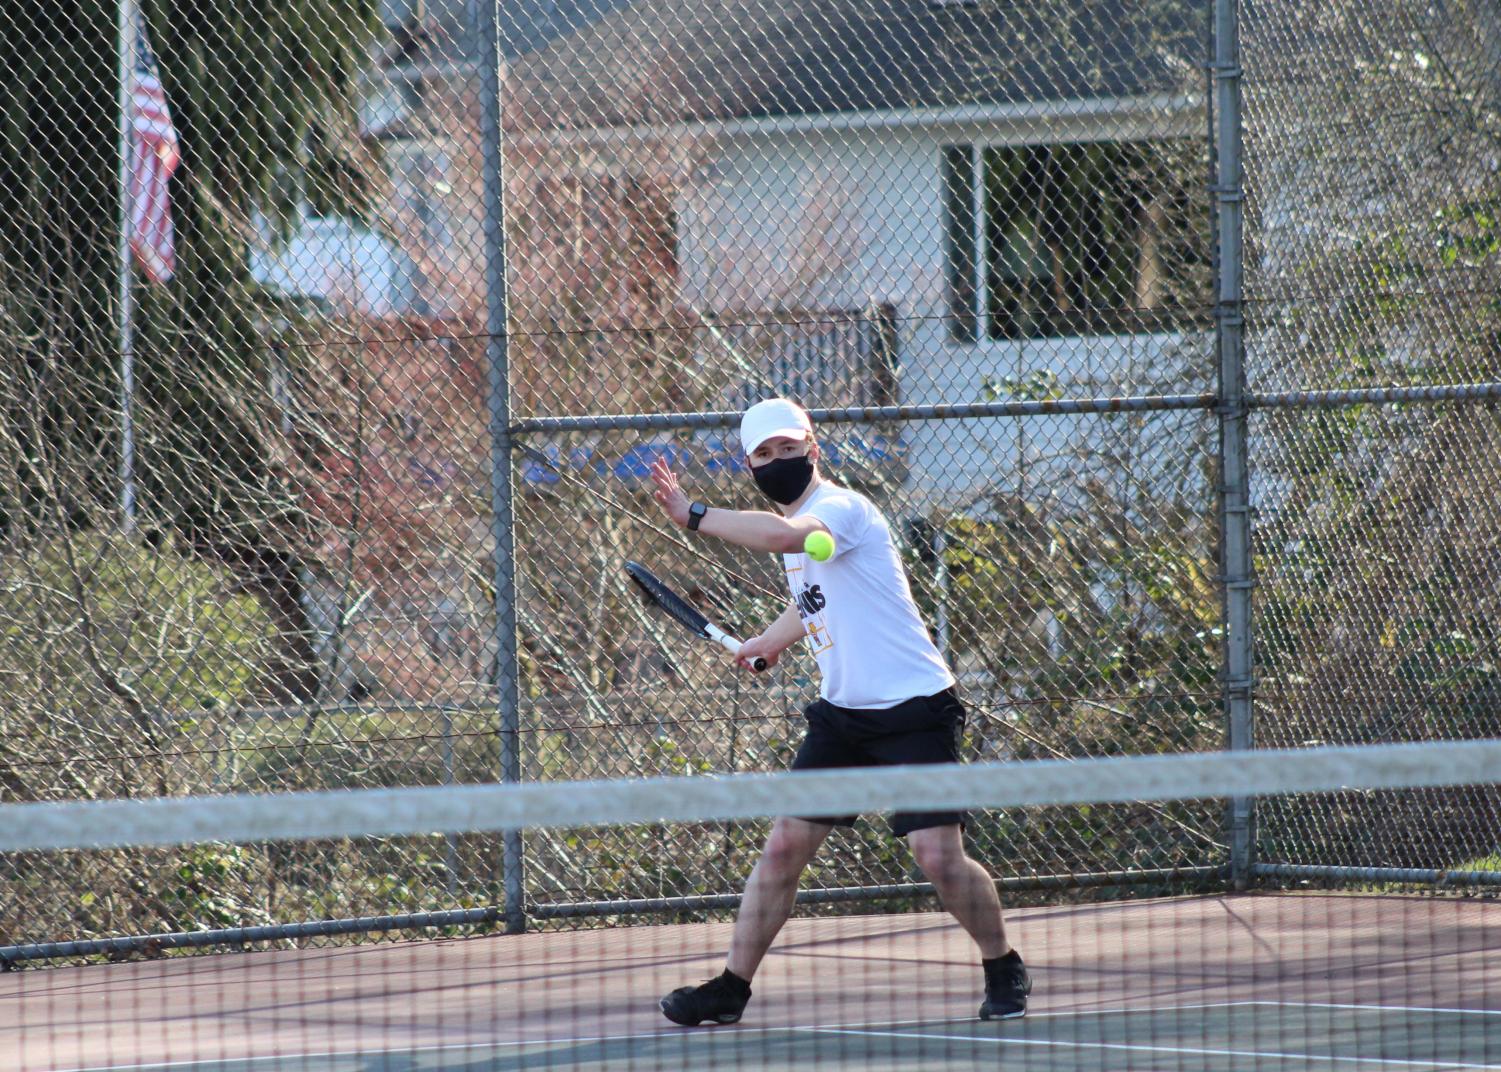 +Senior+and+fourth+singles+player+Daniel+Orr+winds+up+for+a+forehand+during+his+match+against+Woodinville.+Orr+went+on+to+win+both+sets%2C+with+scores+of+6-2+and+6-0.+Photo+courtesy+of+Jim+Orr.+%0A